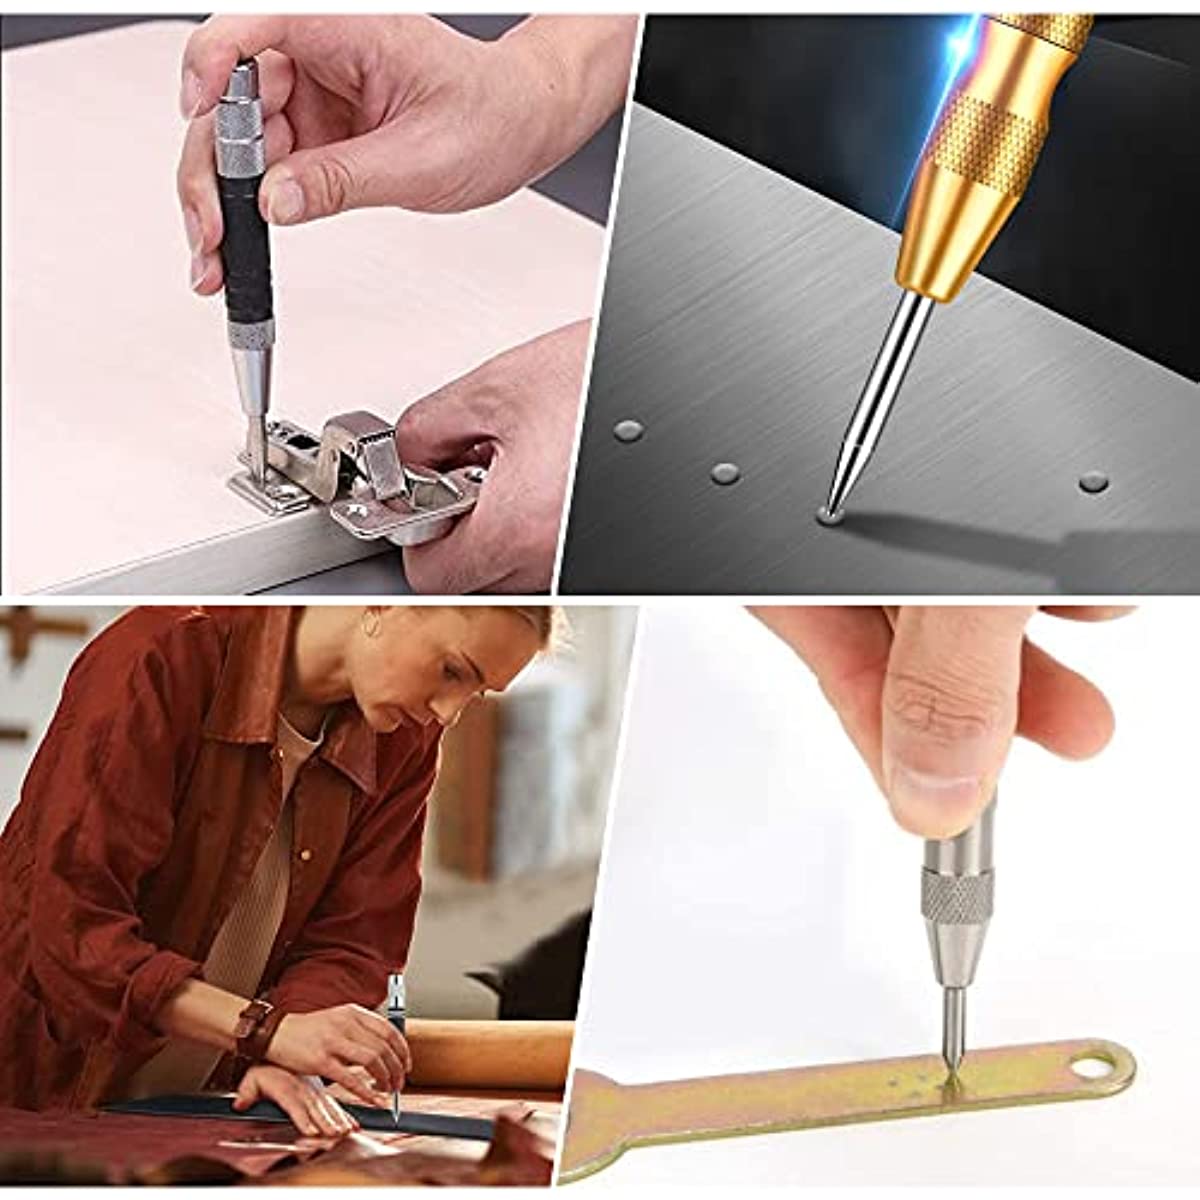 Automatic Center Punch for Metal Scriber Tool - 5 Spring Loaded Window  Breaker Tool Kit Center Hole Punch Metal Hole Punch Heavy Duty - Hole  Puncher